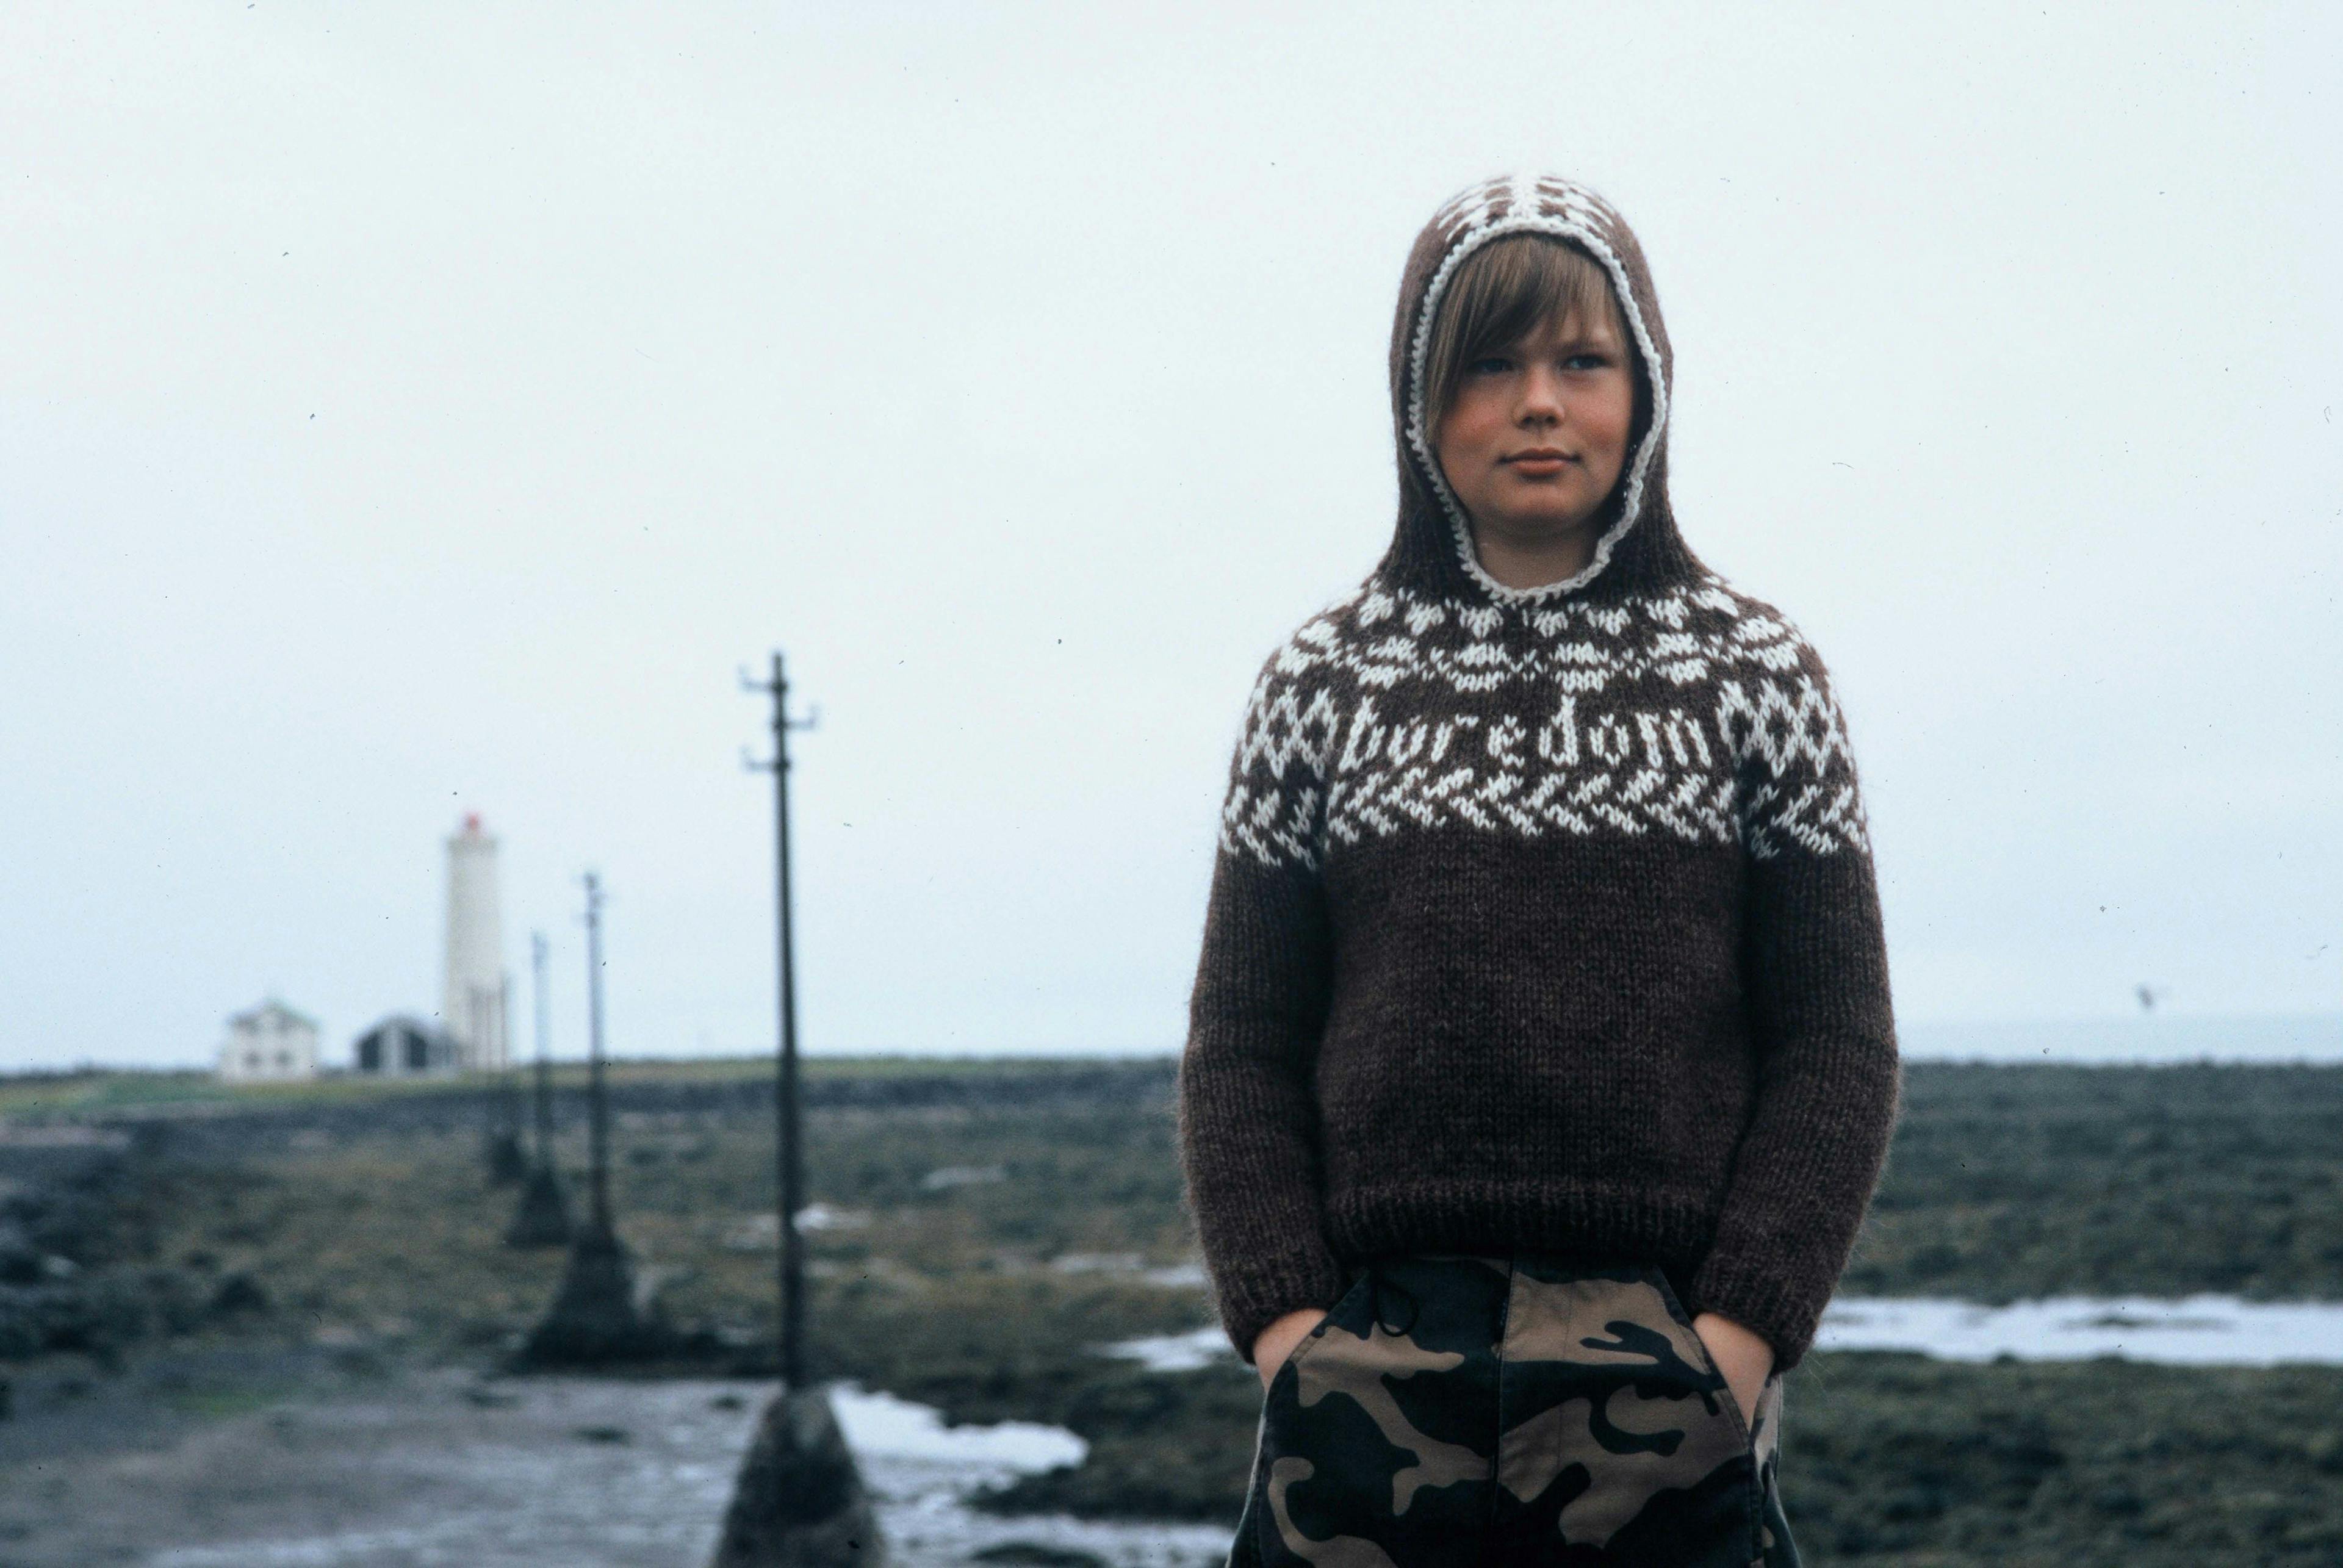 An image of a child wearing a brown sweater facing towards the camera, but looking away, with their hands in their pockets. The blurred background is a stark landscape with buildings in the distance.